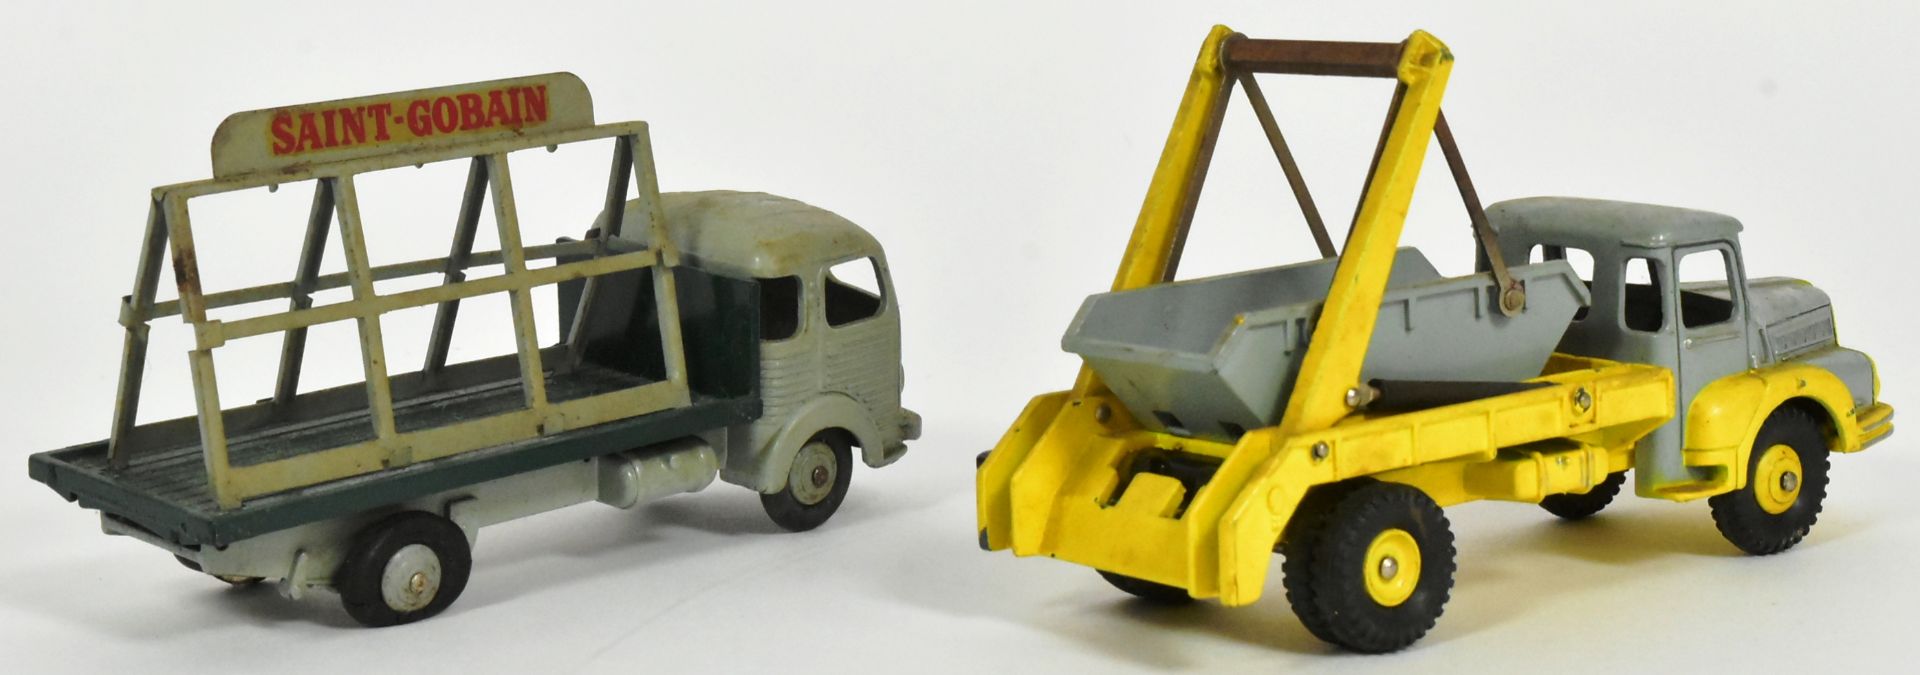 DIECAST - FRENCH DINKY TOYS - SIMCA CARGO & MULTI-BUCKET TRUCK - Image 4 of 6